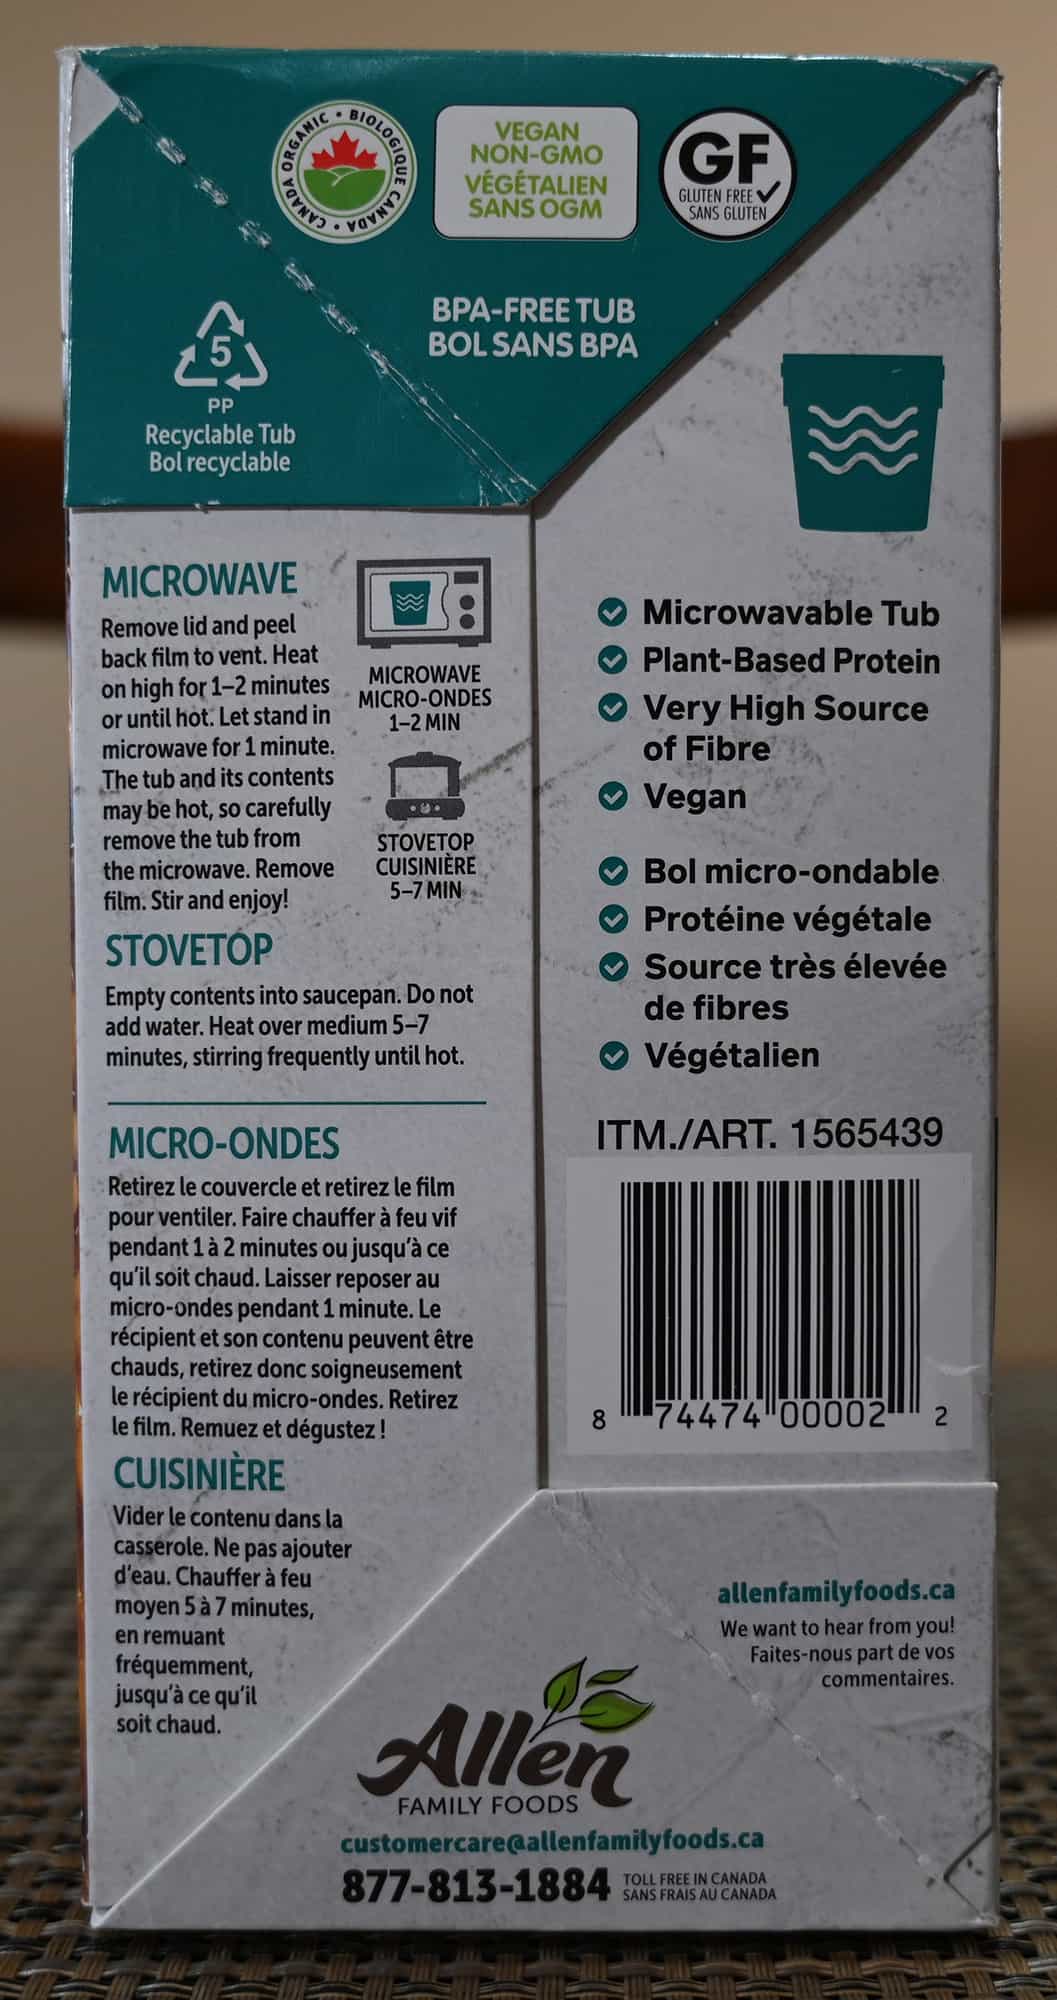 Image of the back of the soup boc showing heating instructions and that the soup comes in a BPA free tub. 